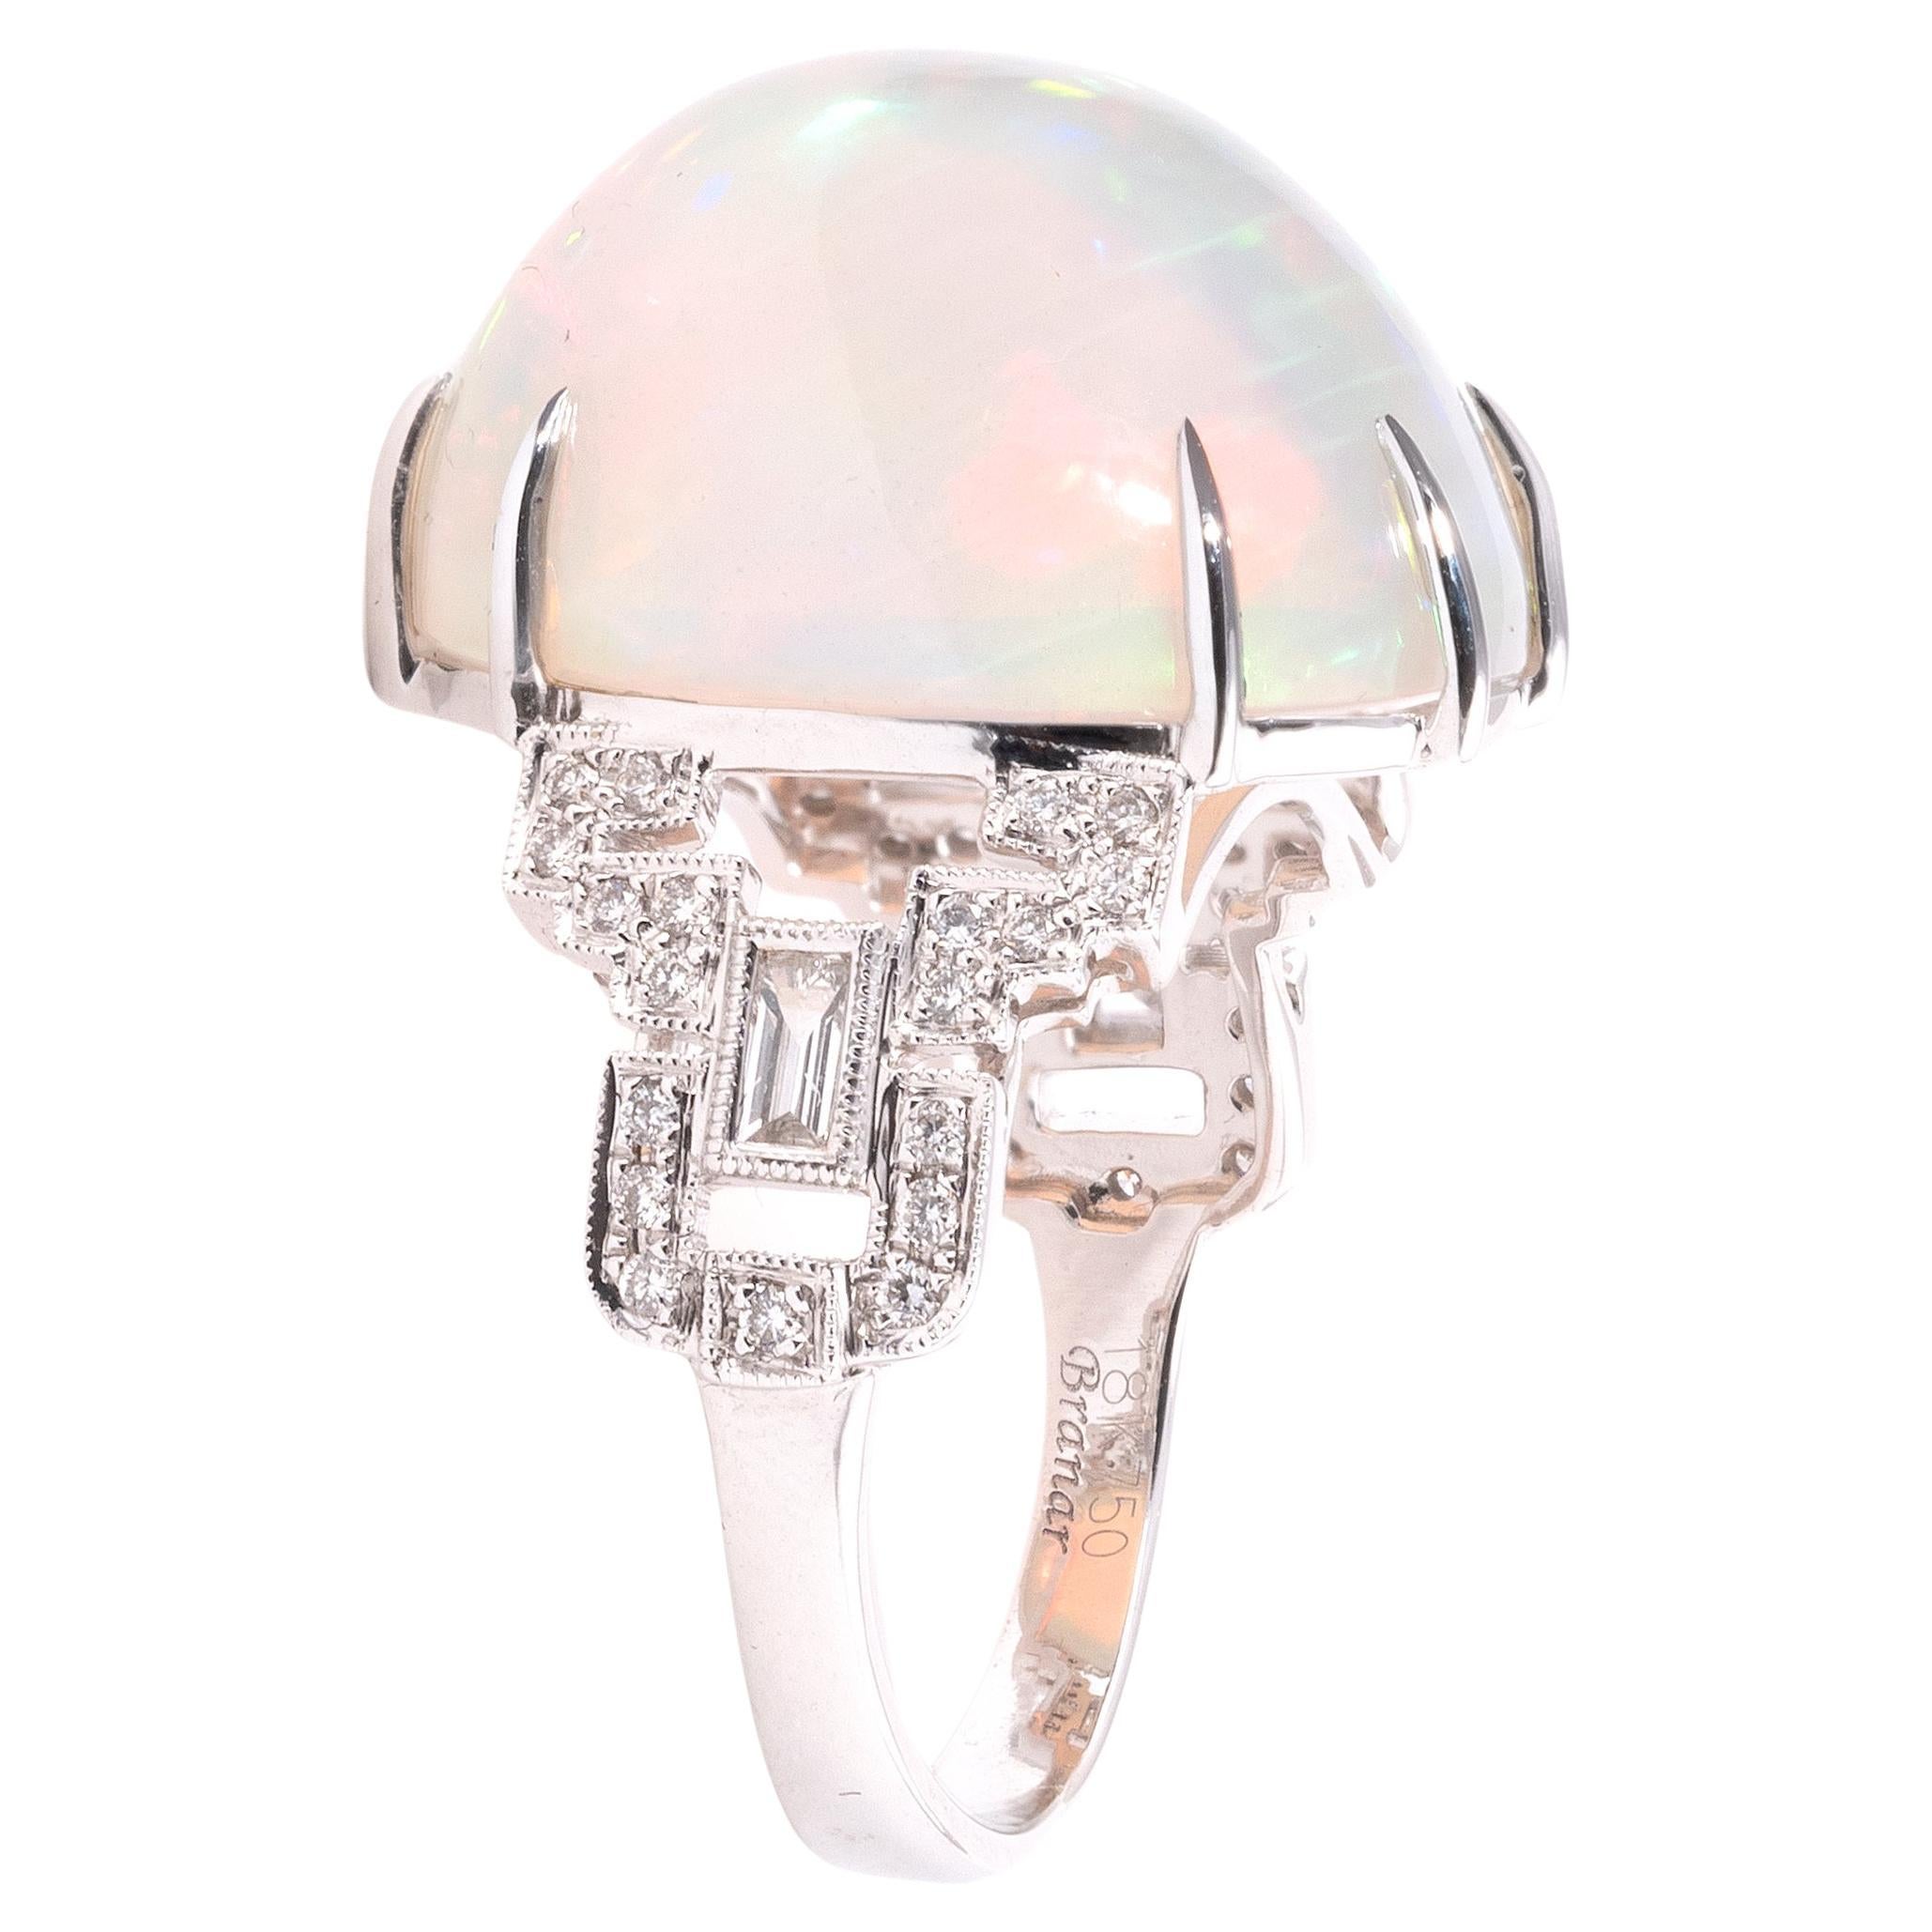 Ring in 750°/°°(18K) white gold, set with a beautiful oval cabochon opal weighing approx. 15 ct, openwork shoulder set with baguette and brilliant-cut diamonds.
Weight  7,2gr.
Size: 6 1/2
Length: 1.9 cm. 